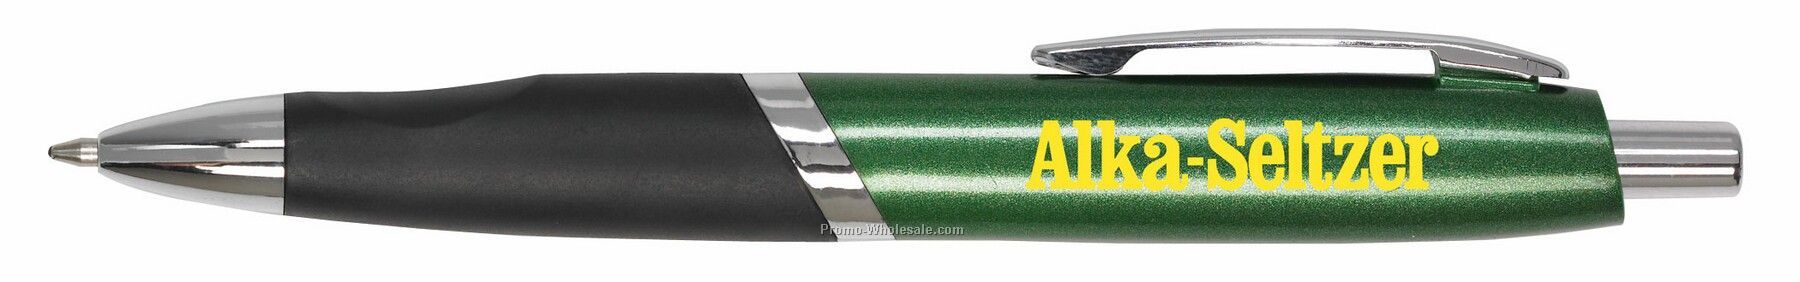 Orion Metallic Color Barrel Pen With Tapered Grip - Next Day Ship